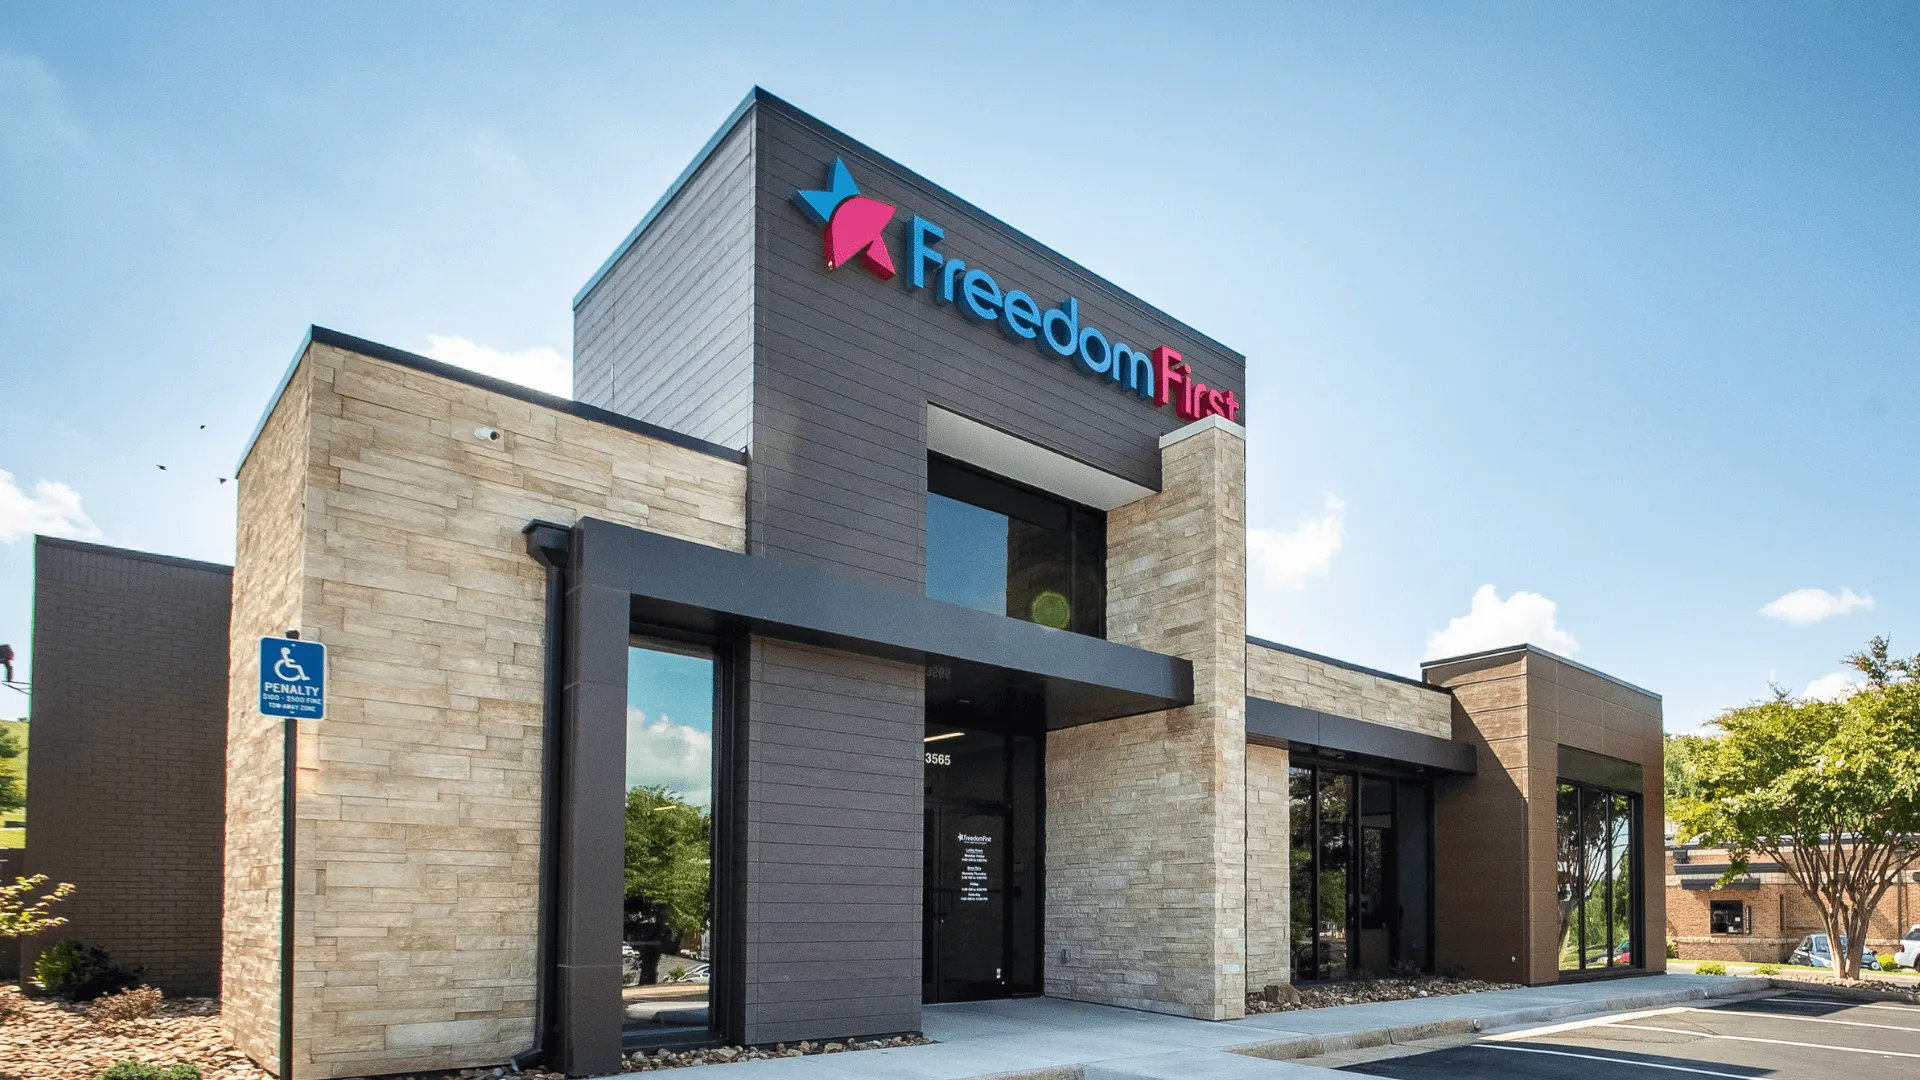 The exterior of the Freedom First Credit Union building in Bonsack, Virginia.